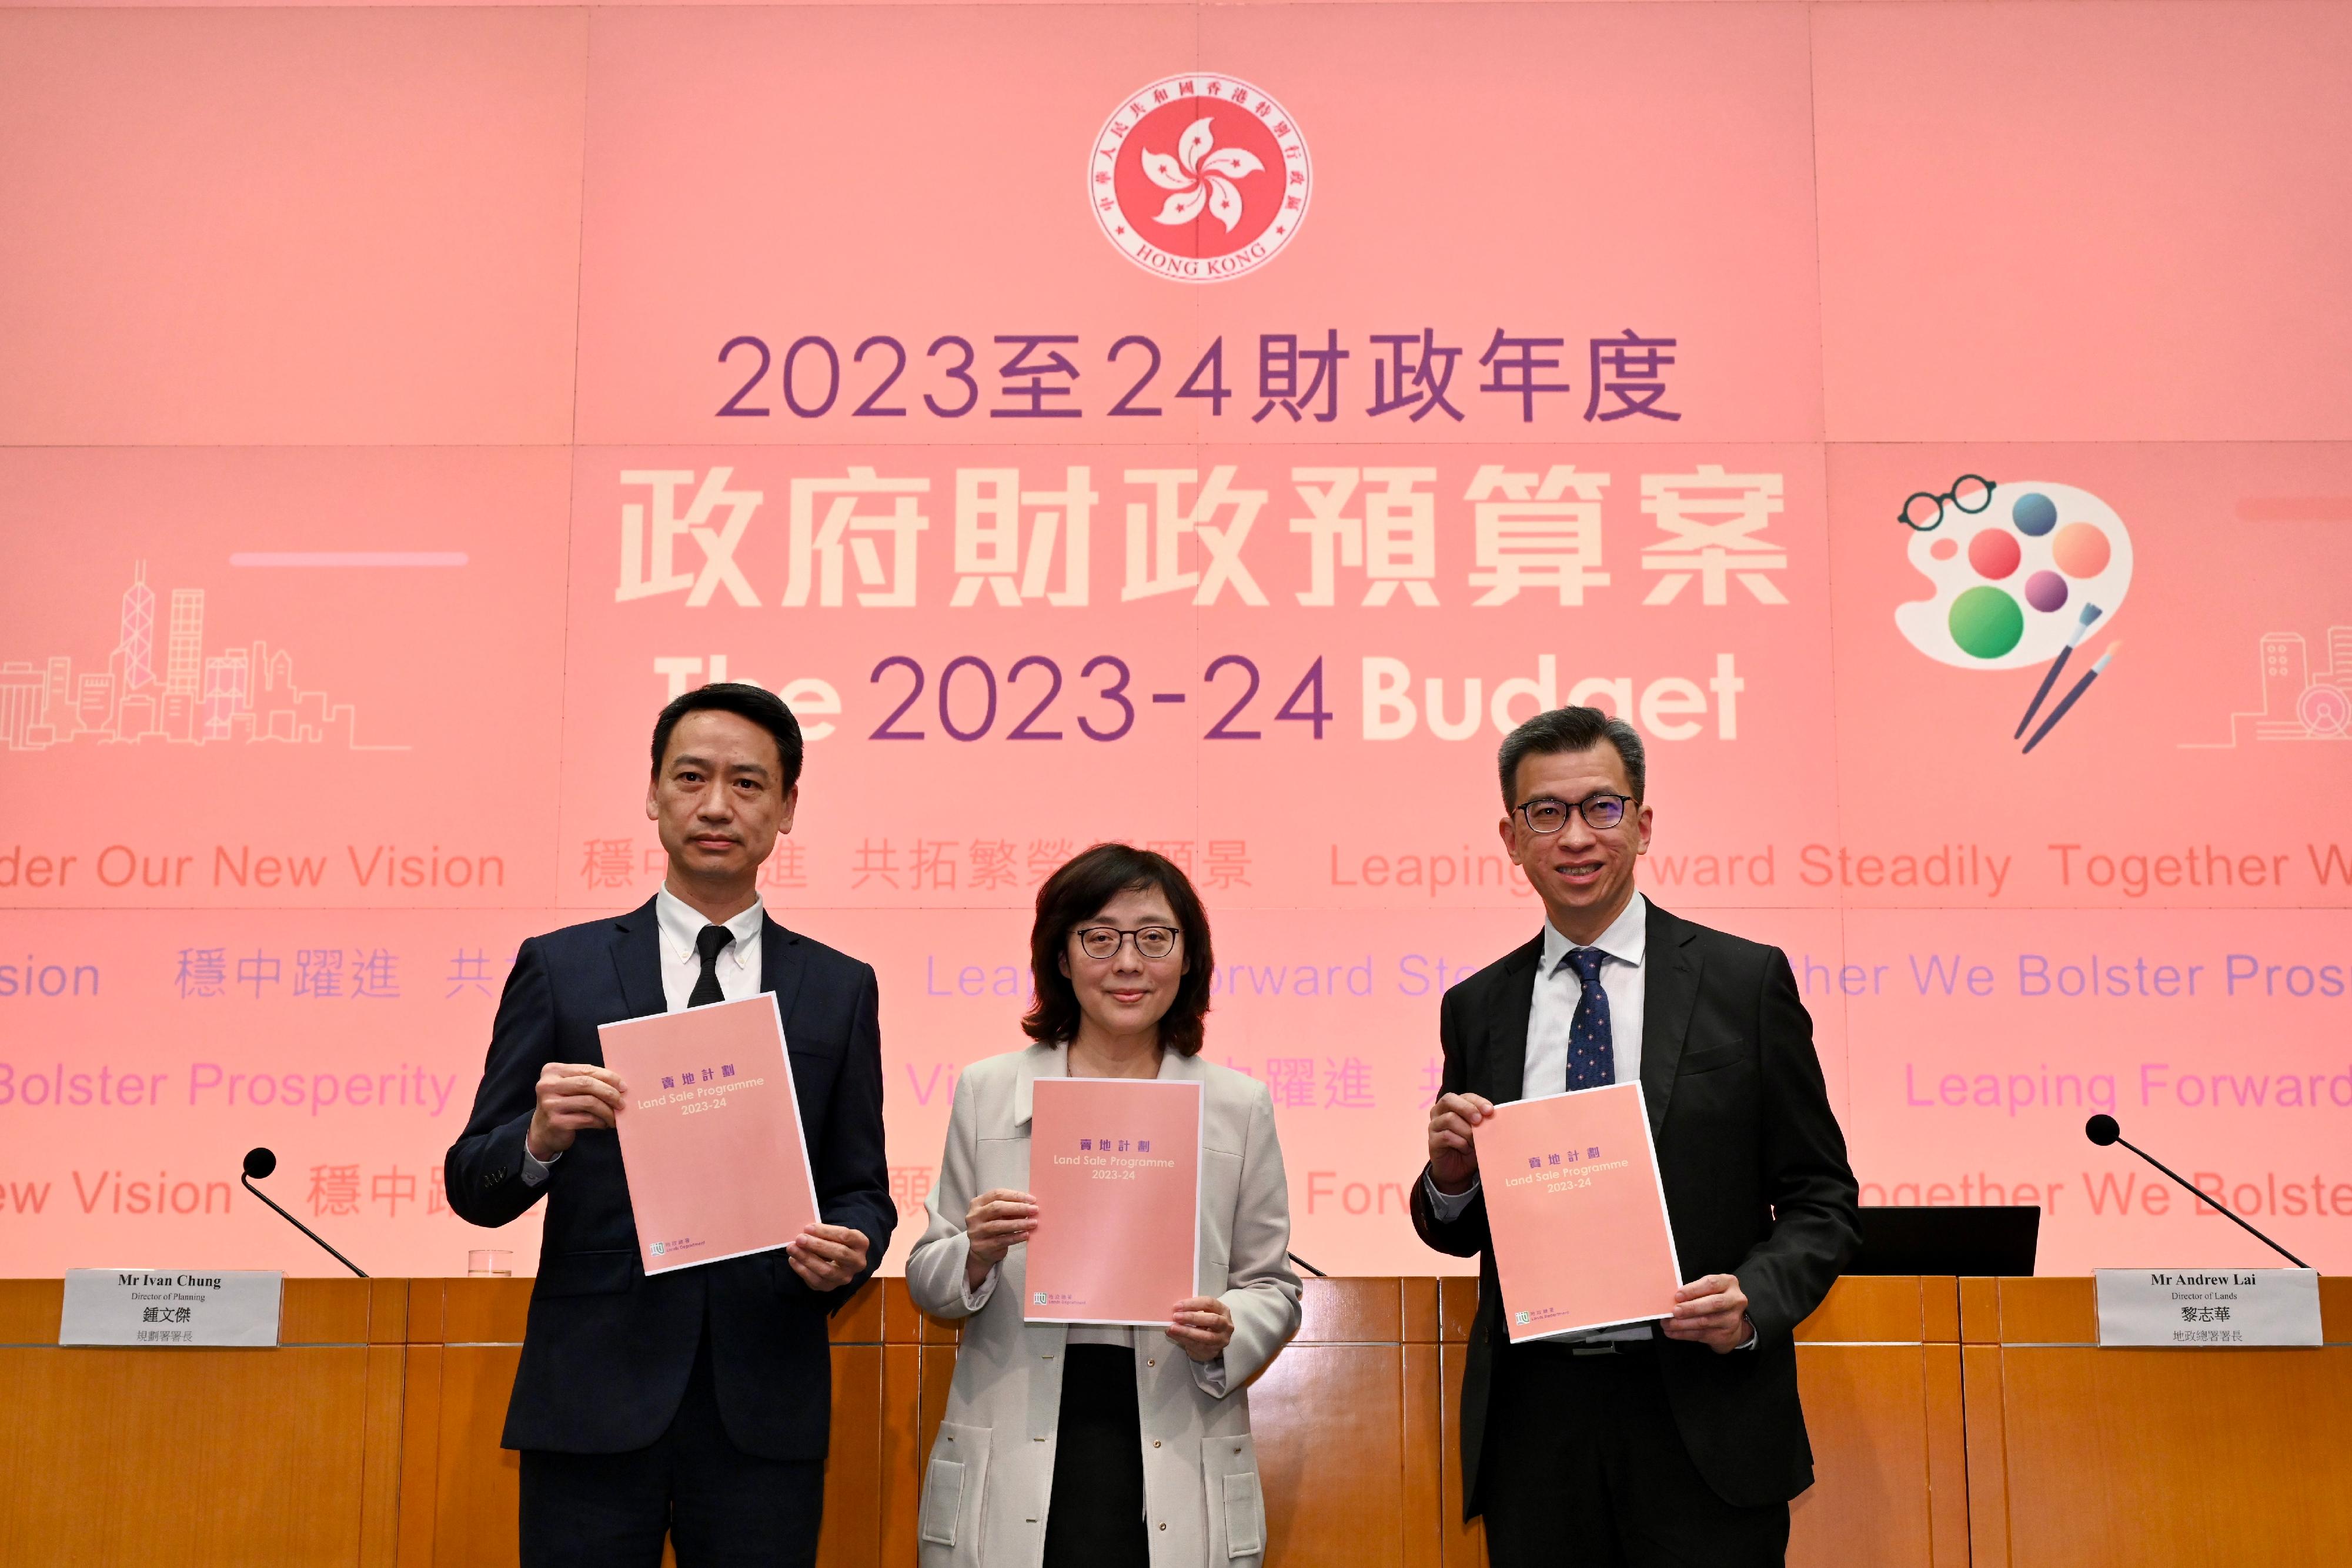 The Secretary for Development, Ms Bernadette Linn (centre), holds a press conference today (February 23) on the 2023-24 Land Sale Programme. Also in attendance are the Director of Lands, Mr Andrew Lai (right), and the Director of Planning, Mr Ivan Chung (left).